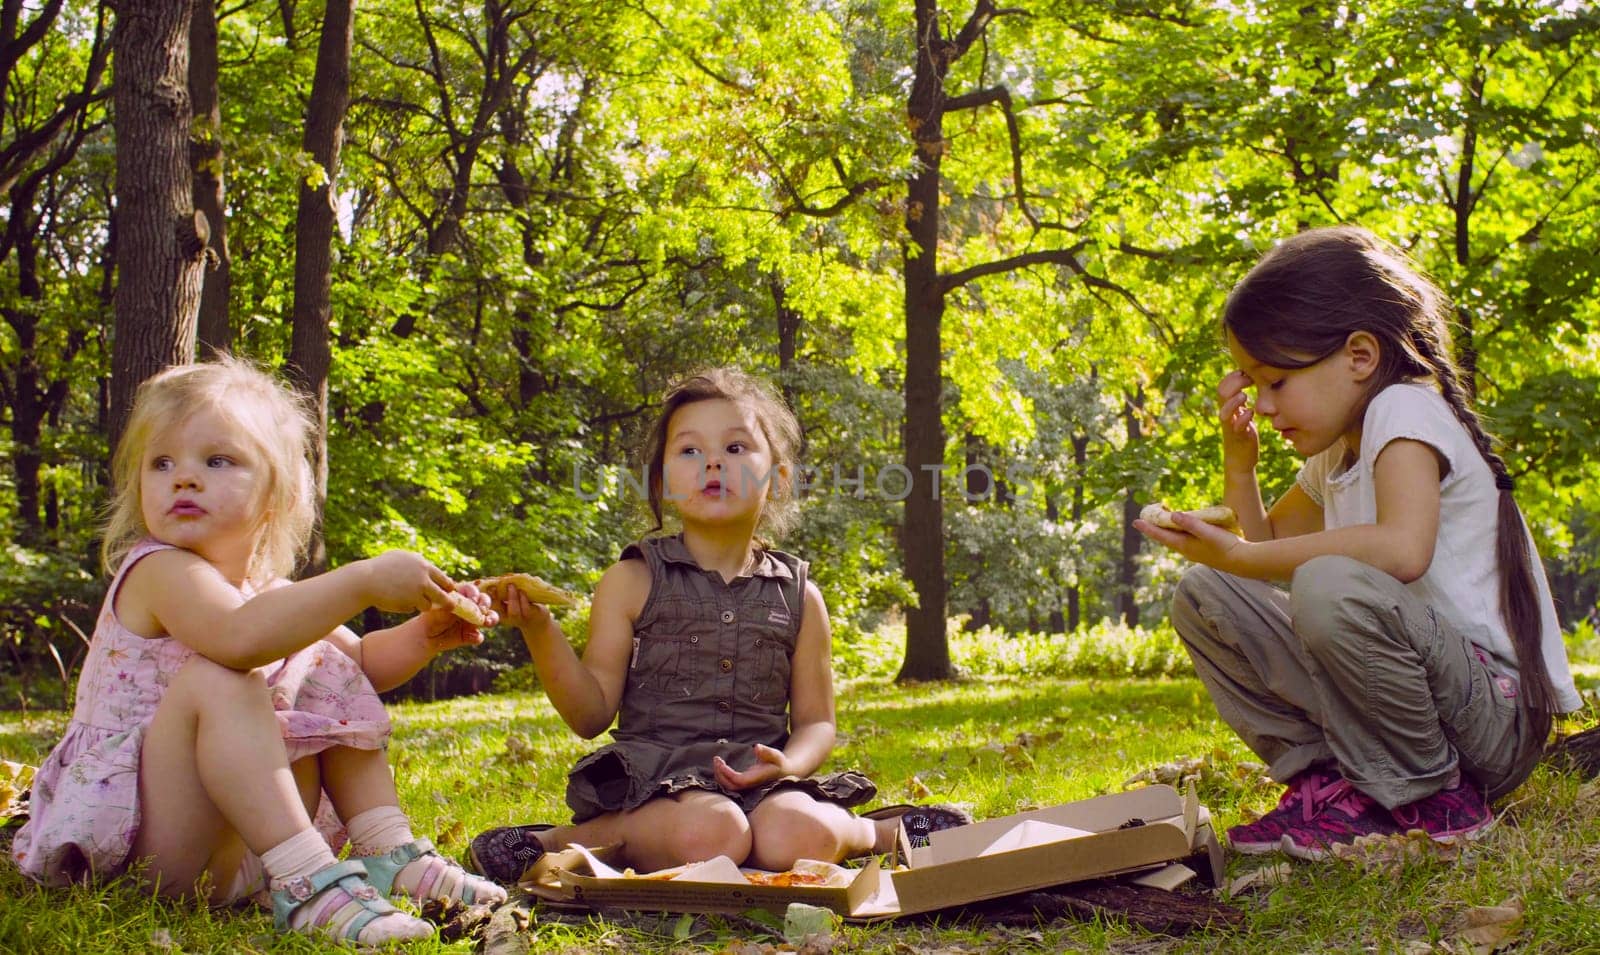 Breakfast on the grass. Three girls sitting in the park and eating pizza.